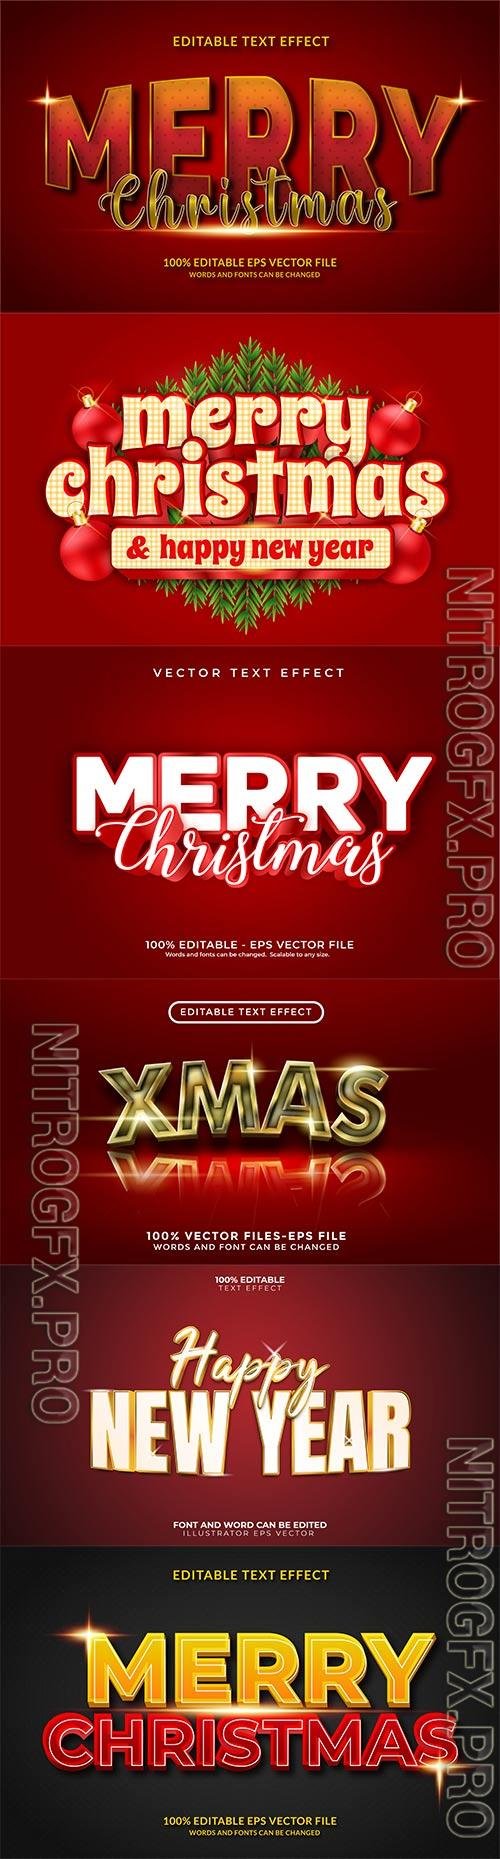 2022 New year and christmas editable text effect vector vol 19